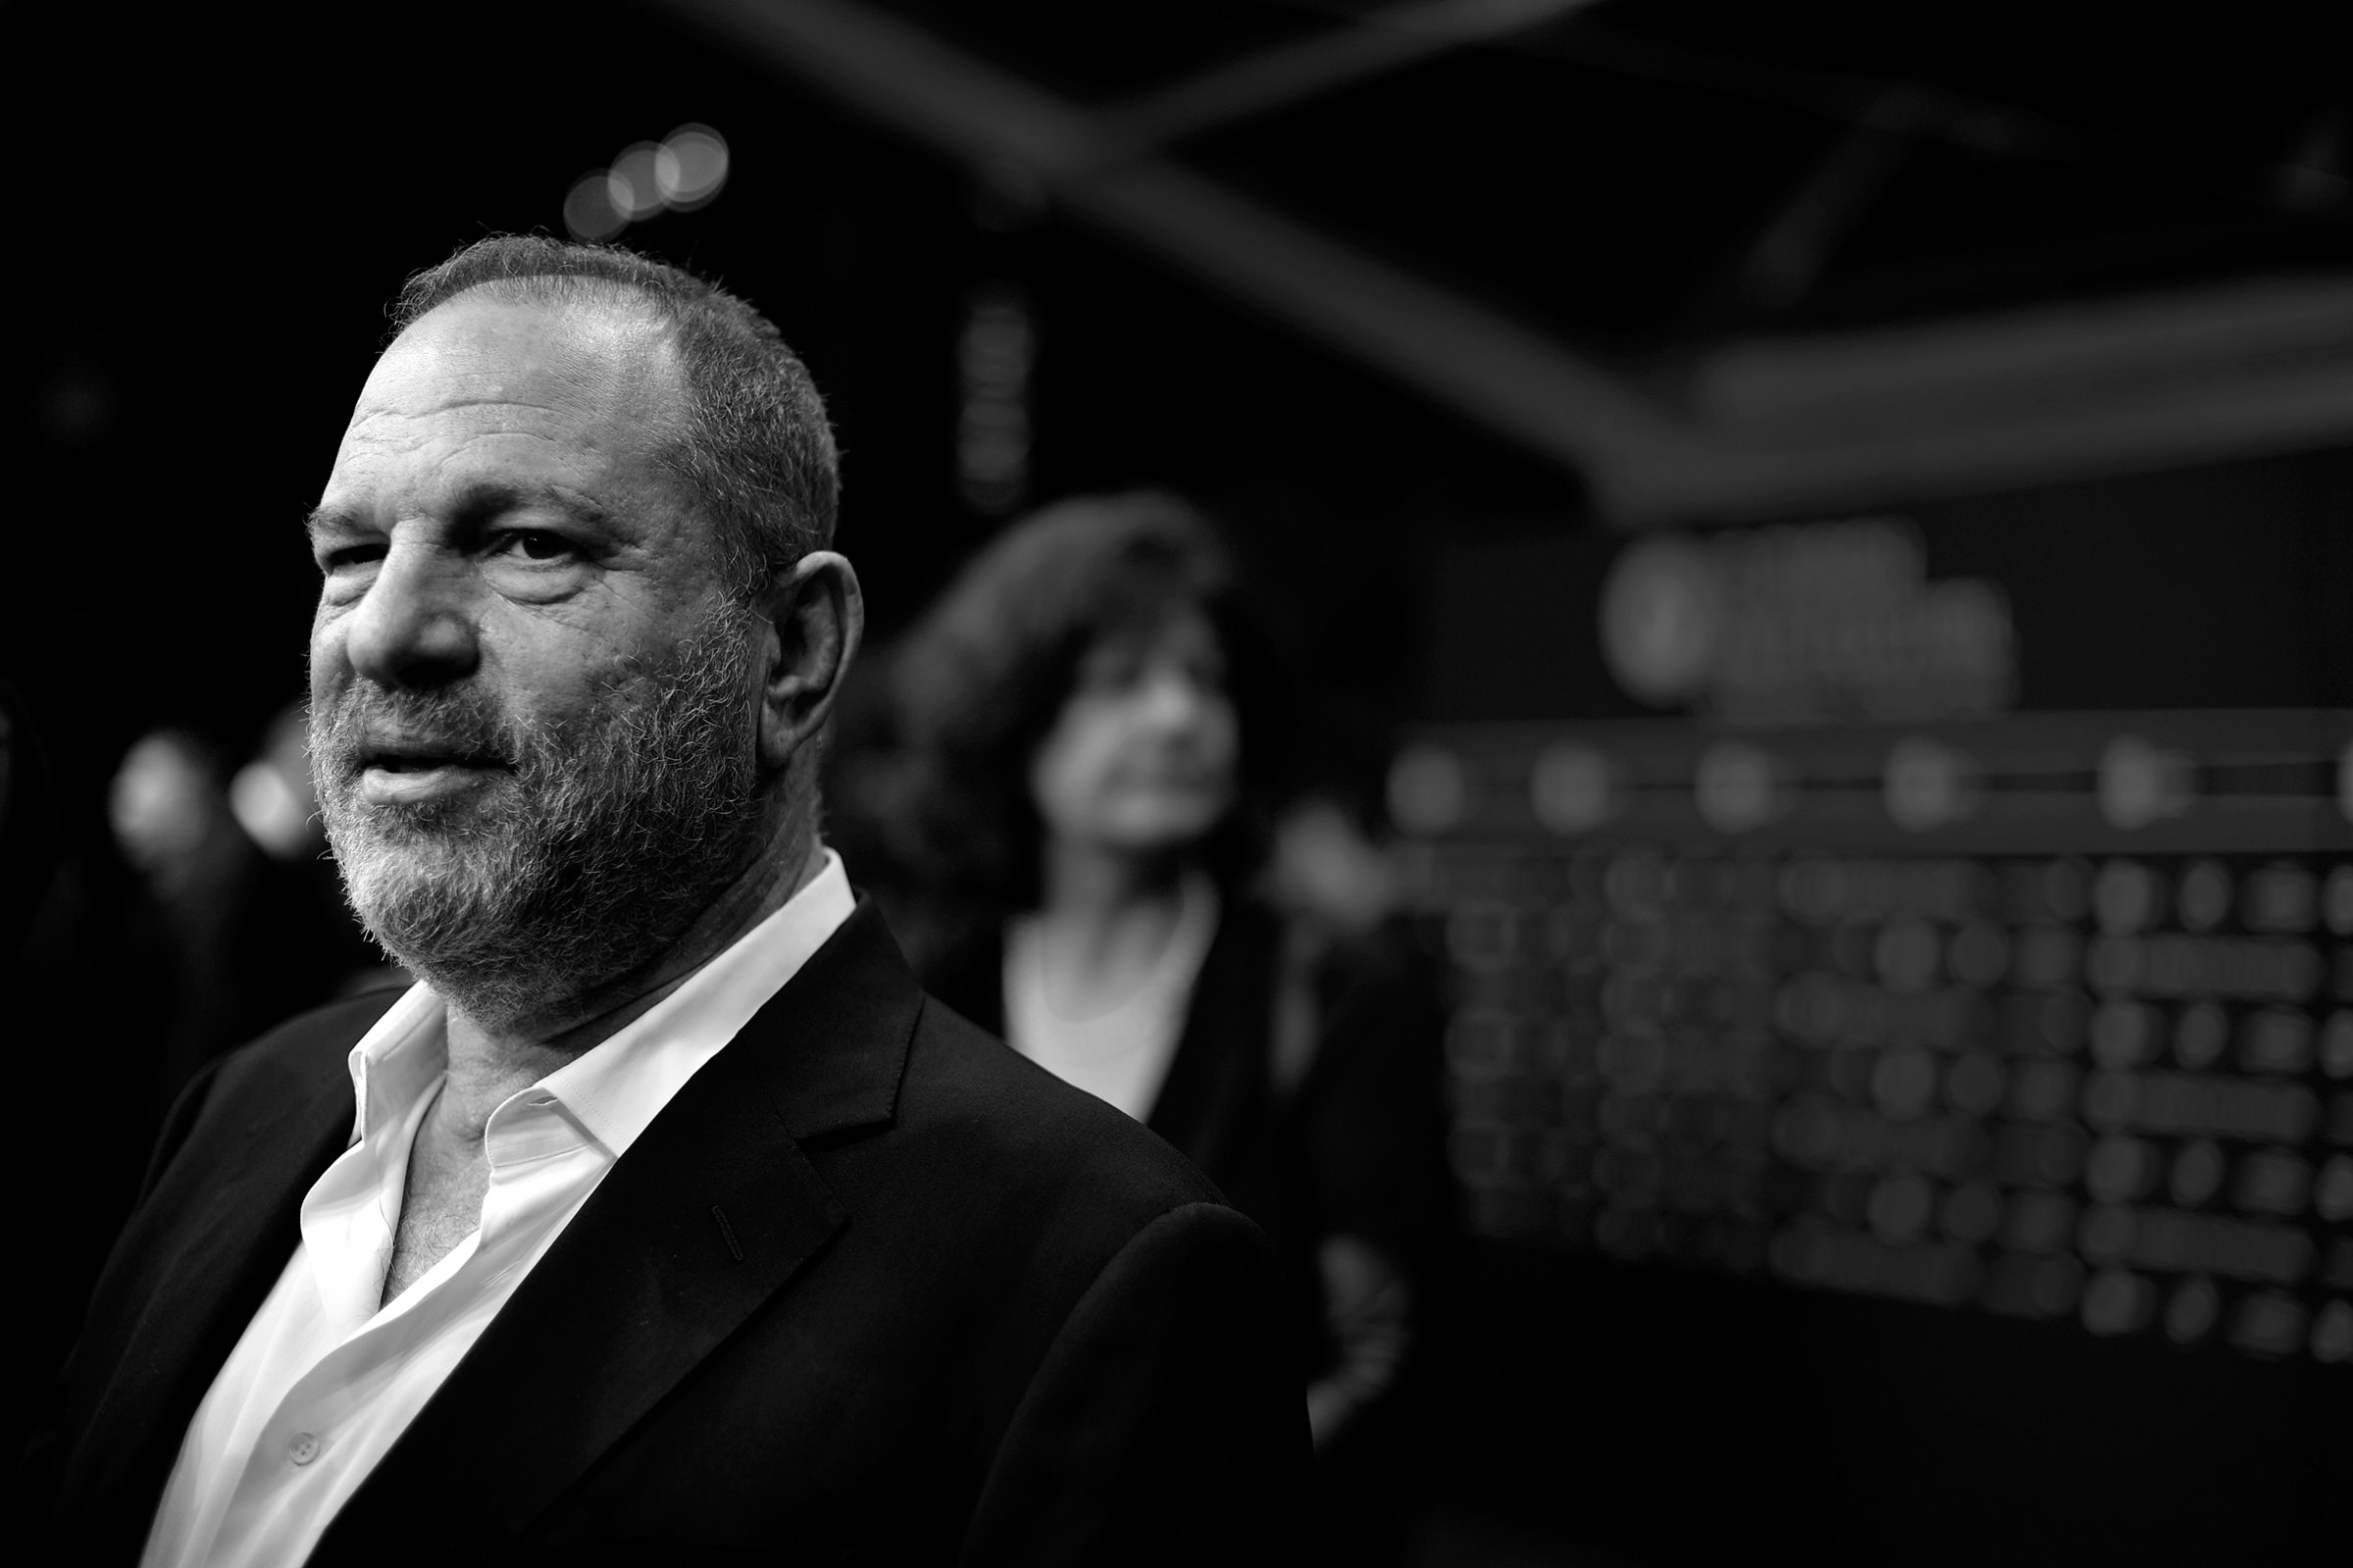 Harvey Weinstein attends the 'Lion' premiere and opening ceremony of the 12th Zurich Film Festival at Kino Corso on Sept. 22, 2016 in Zurich.